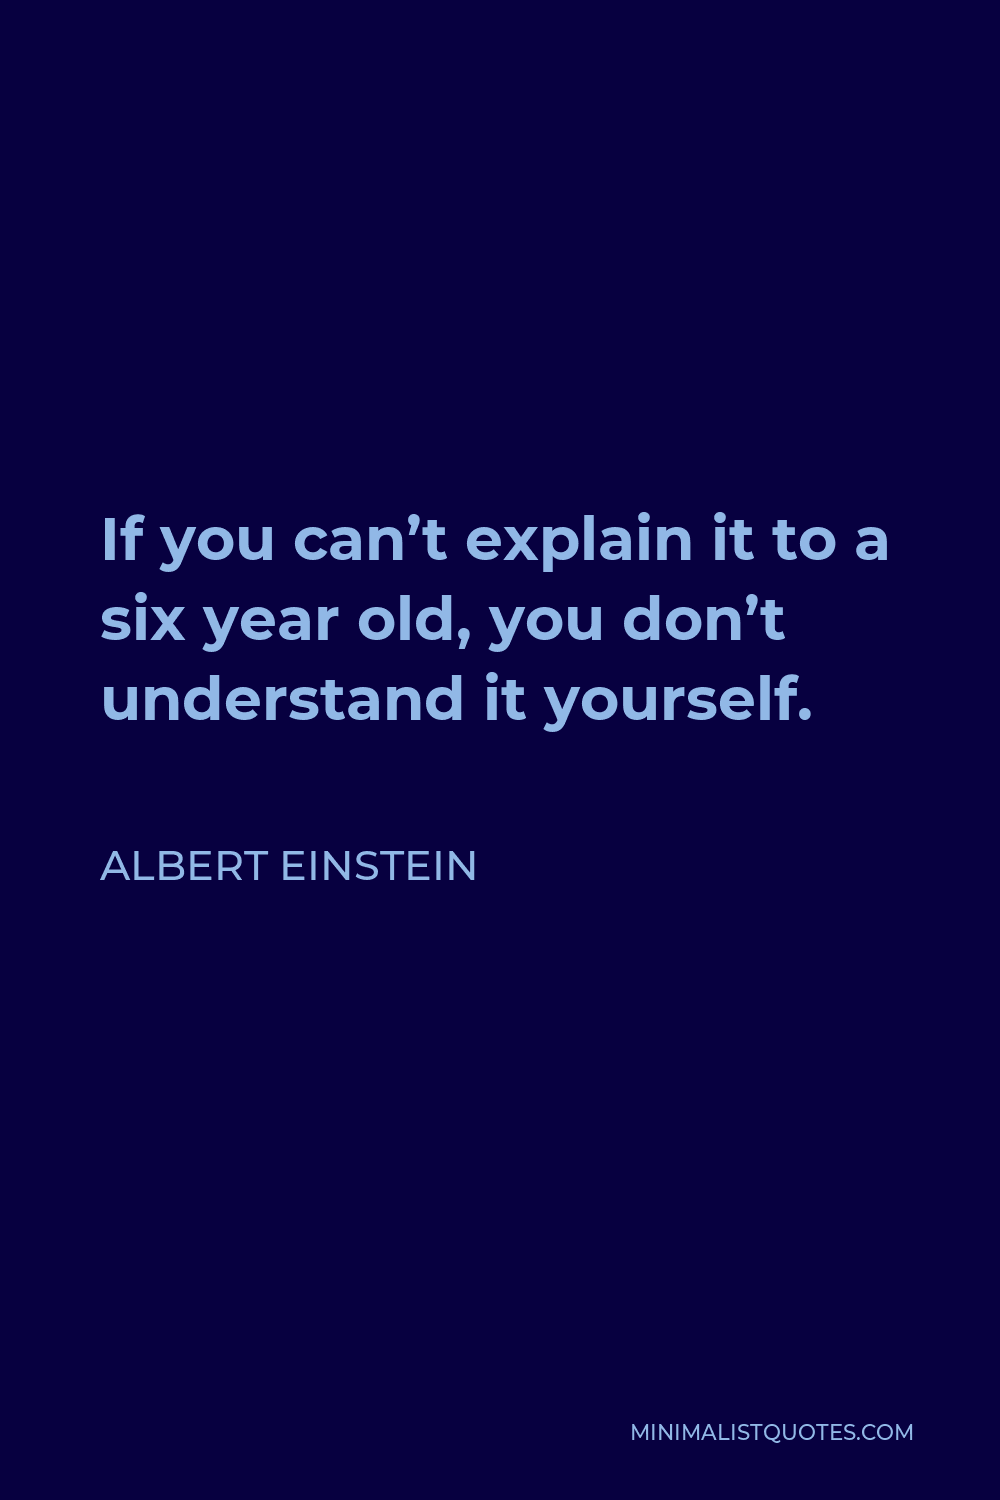 Albert Einstein Quote - If you can’t explain it to a six year old, you don’t understand it yourself.